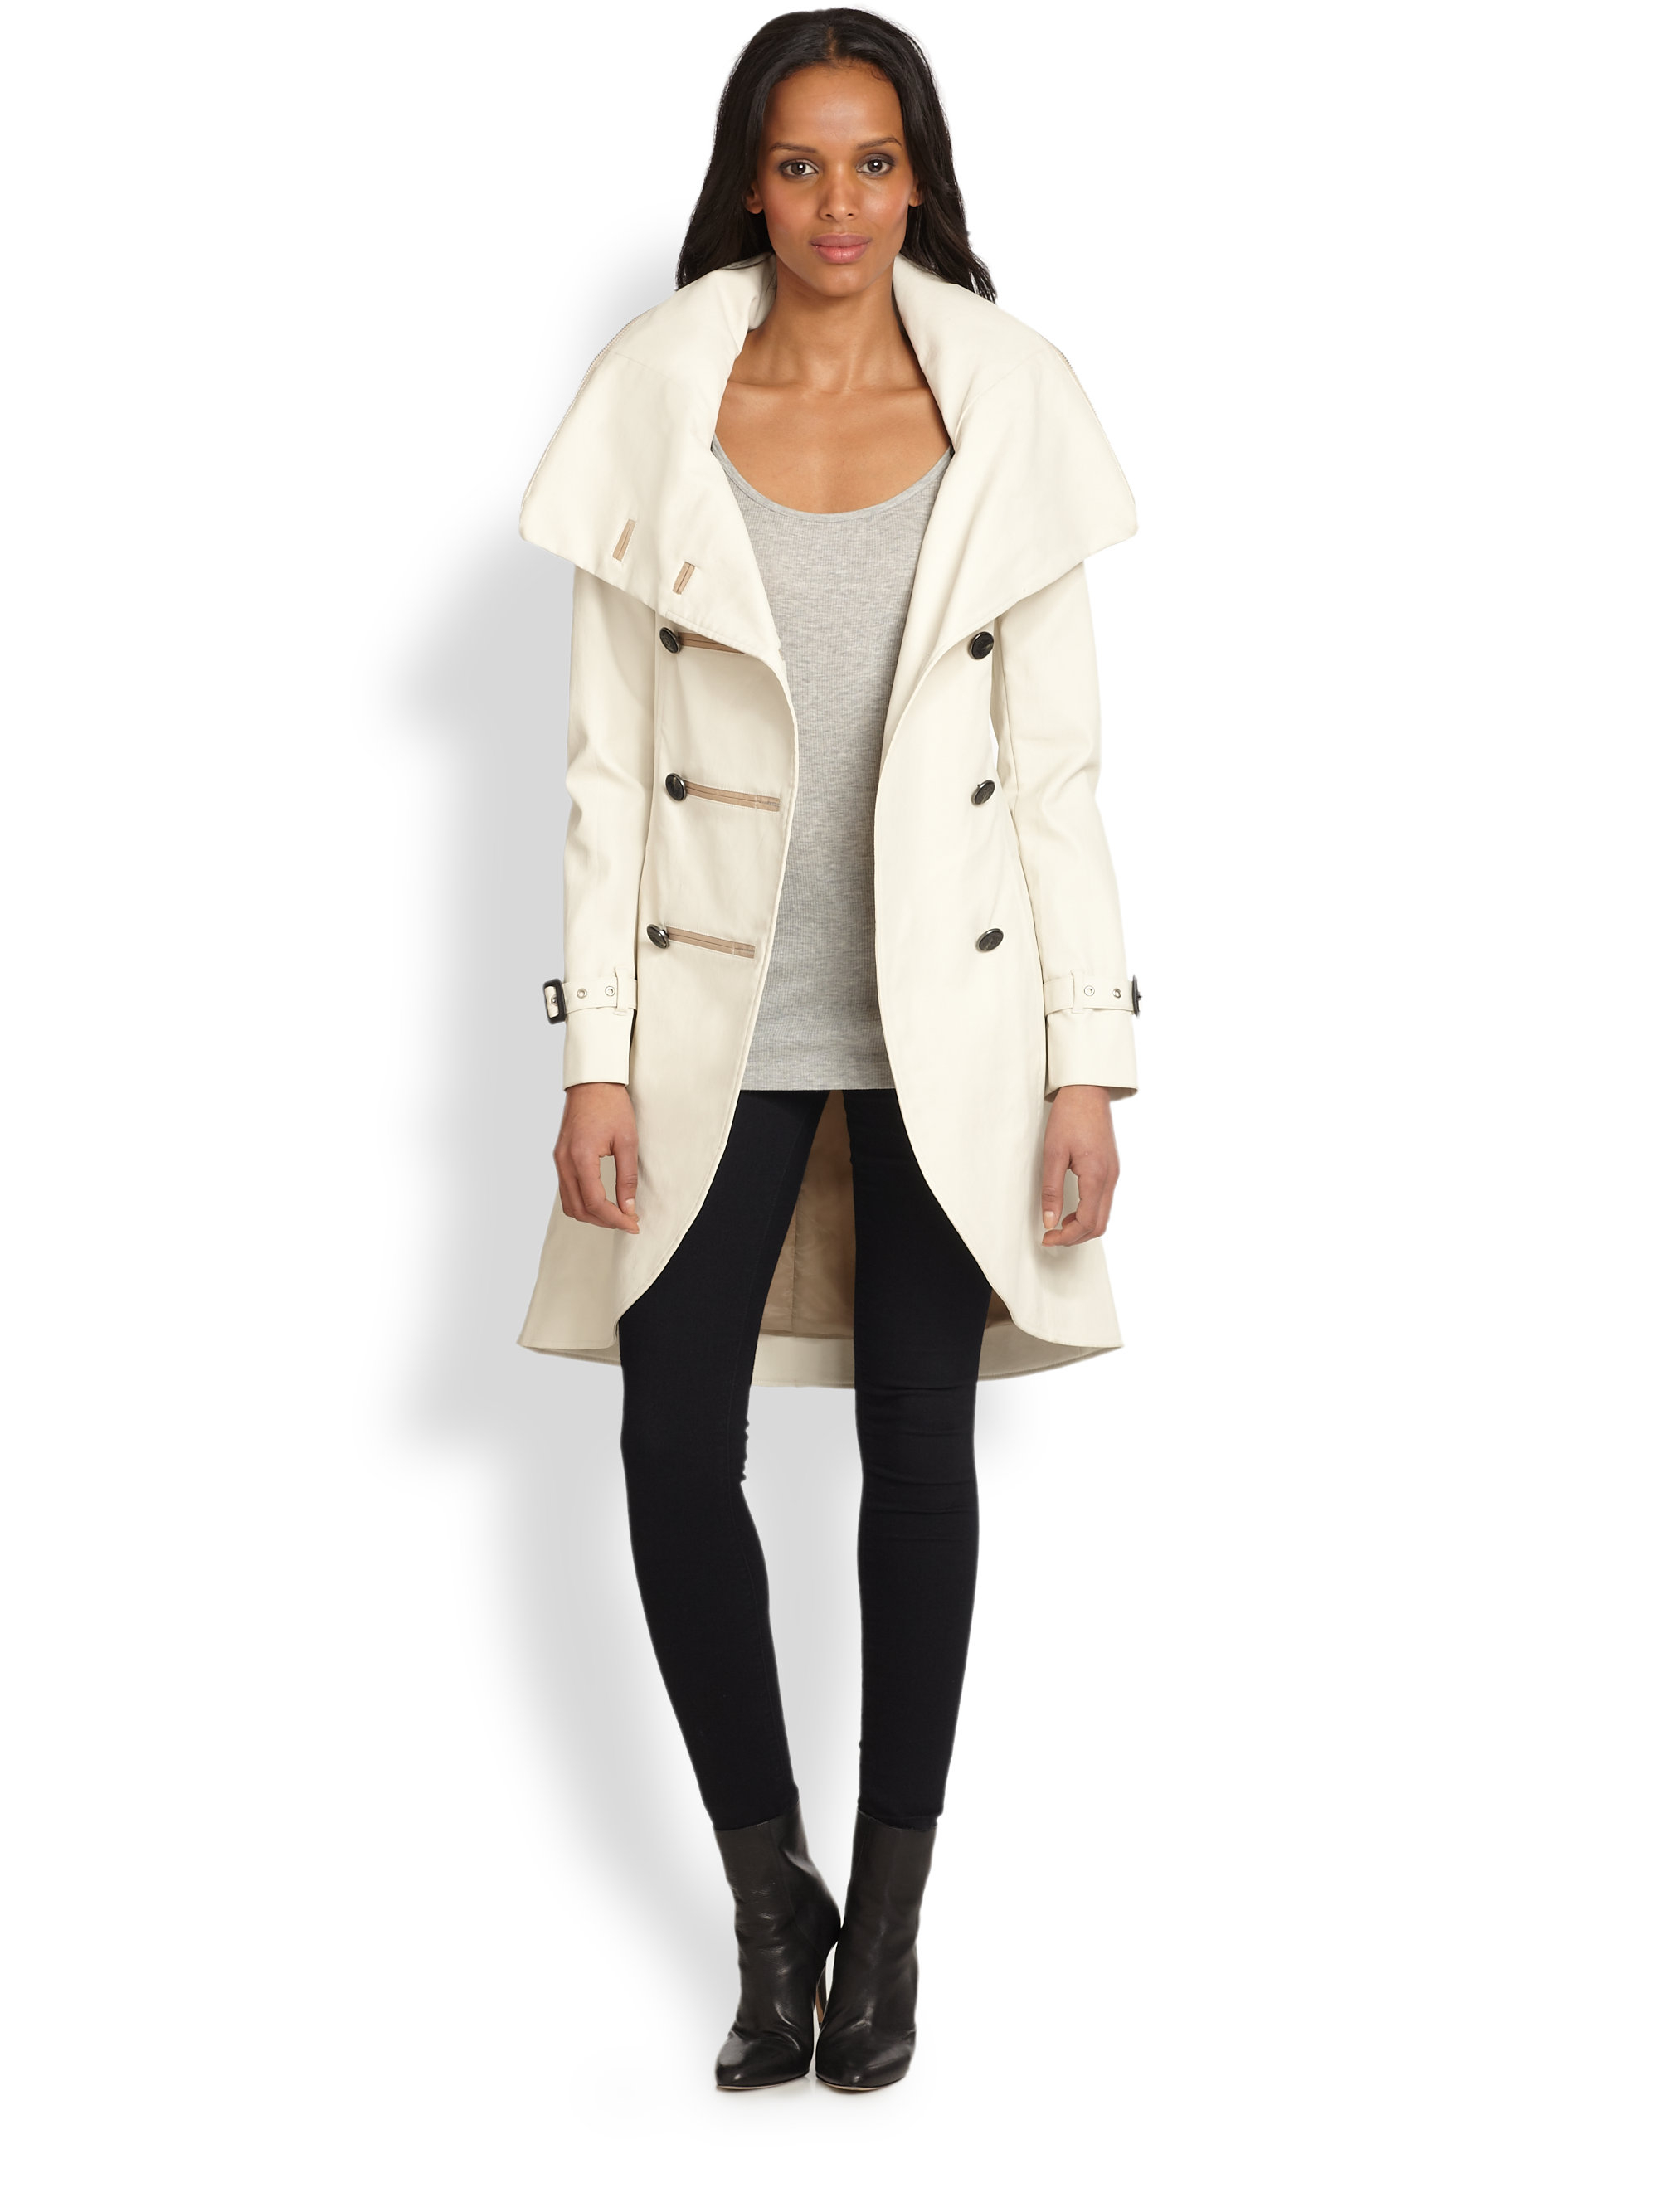 Lyst - Mackage Liana Military Trenchcoat in Natural